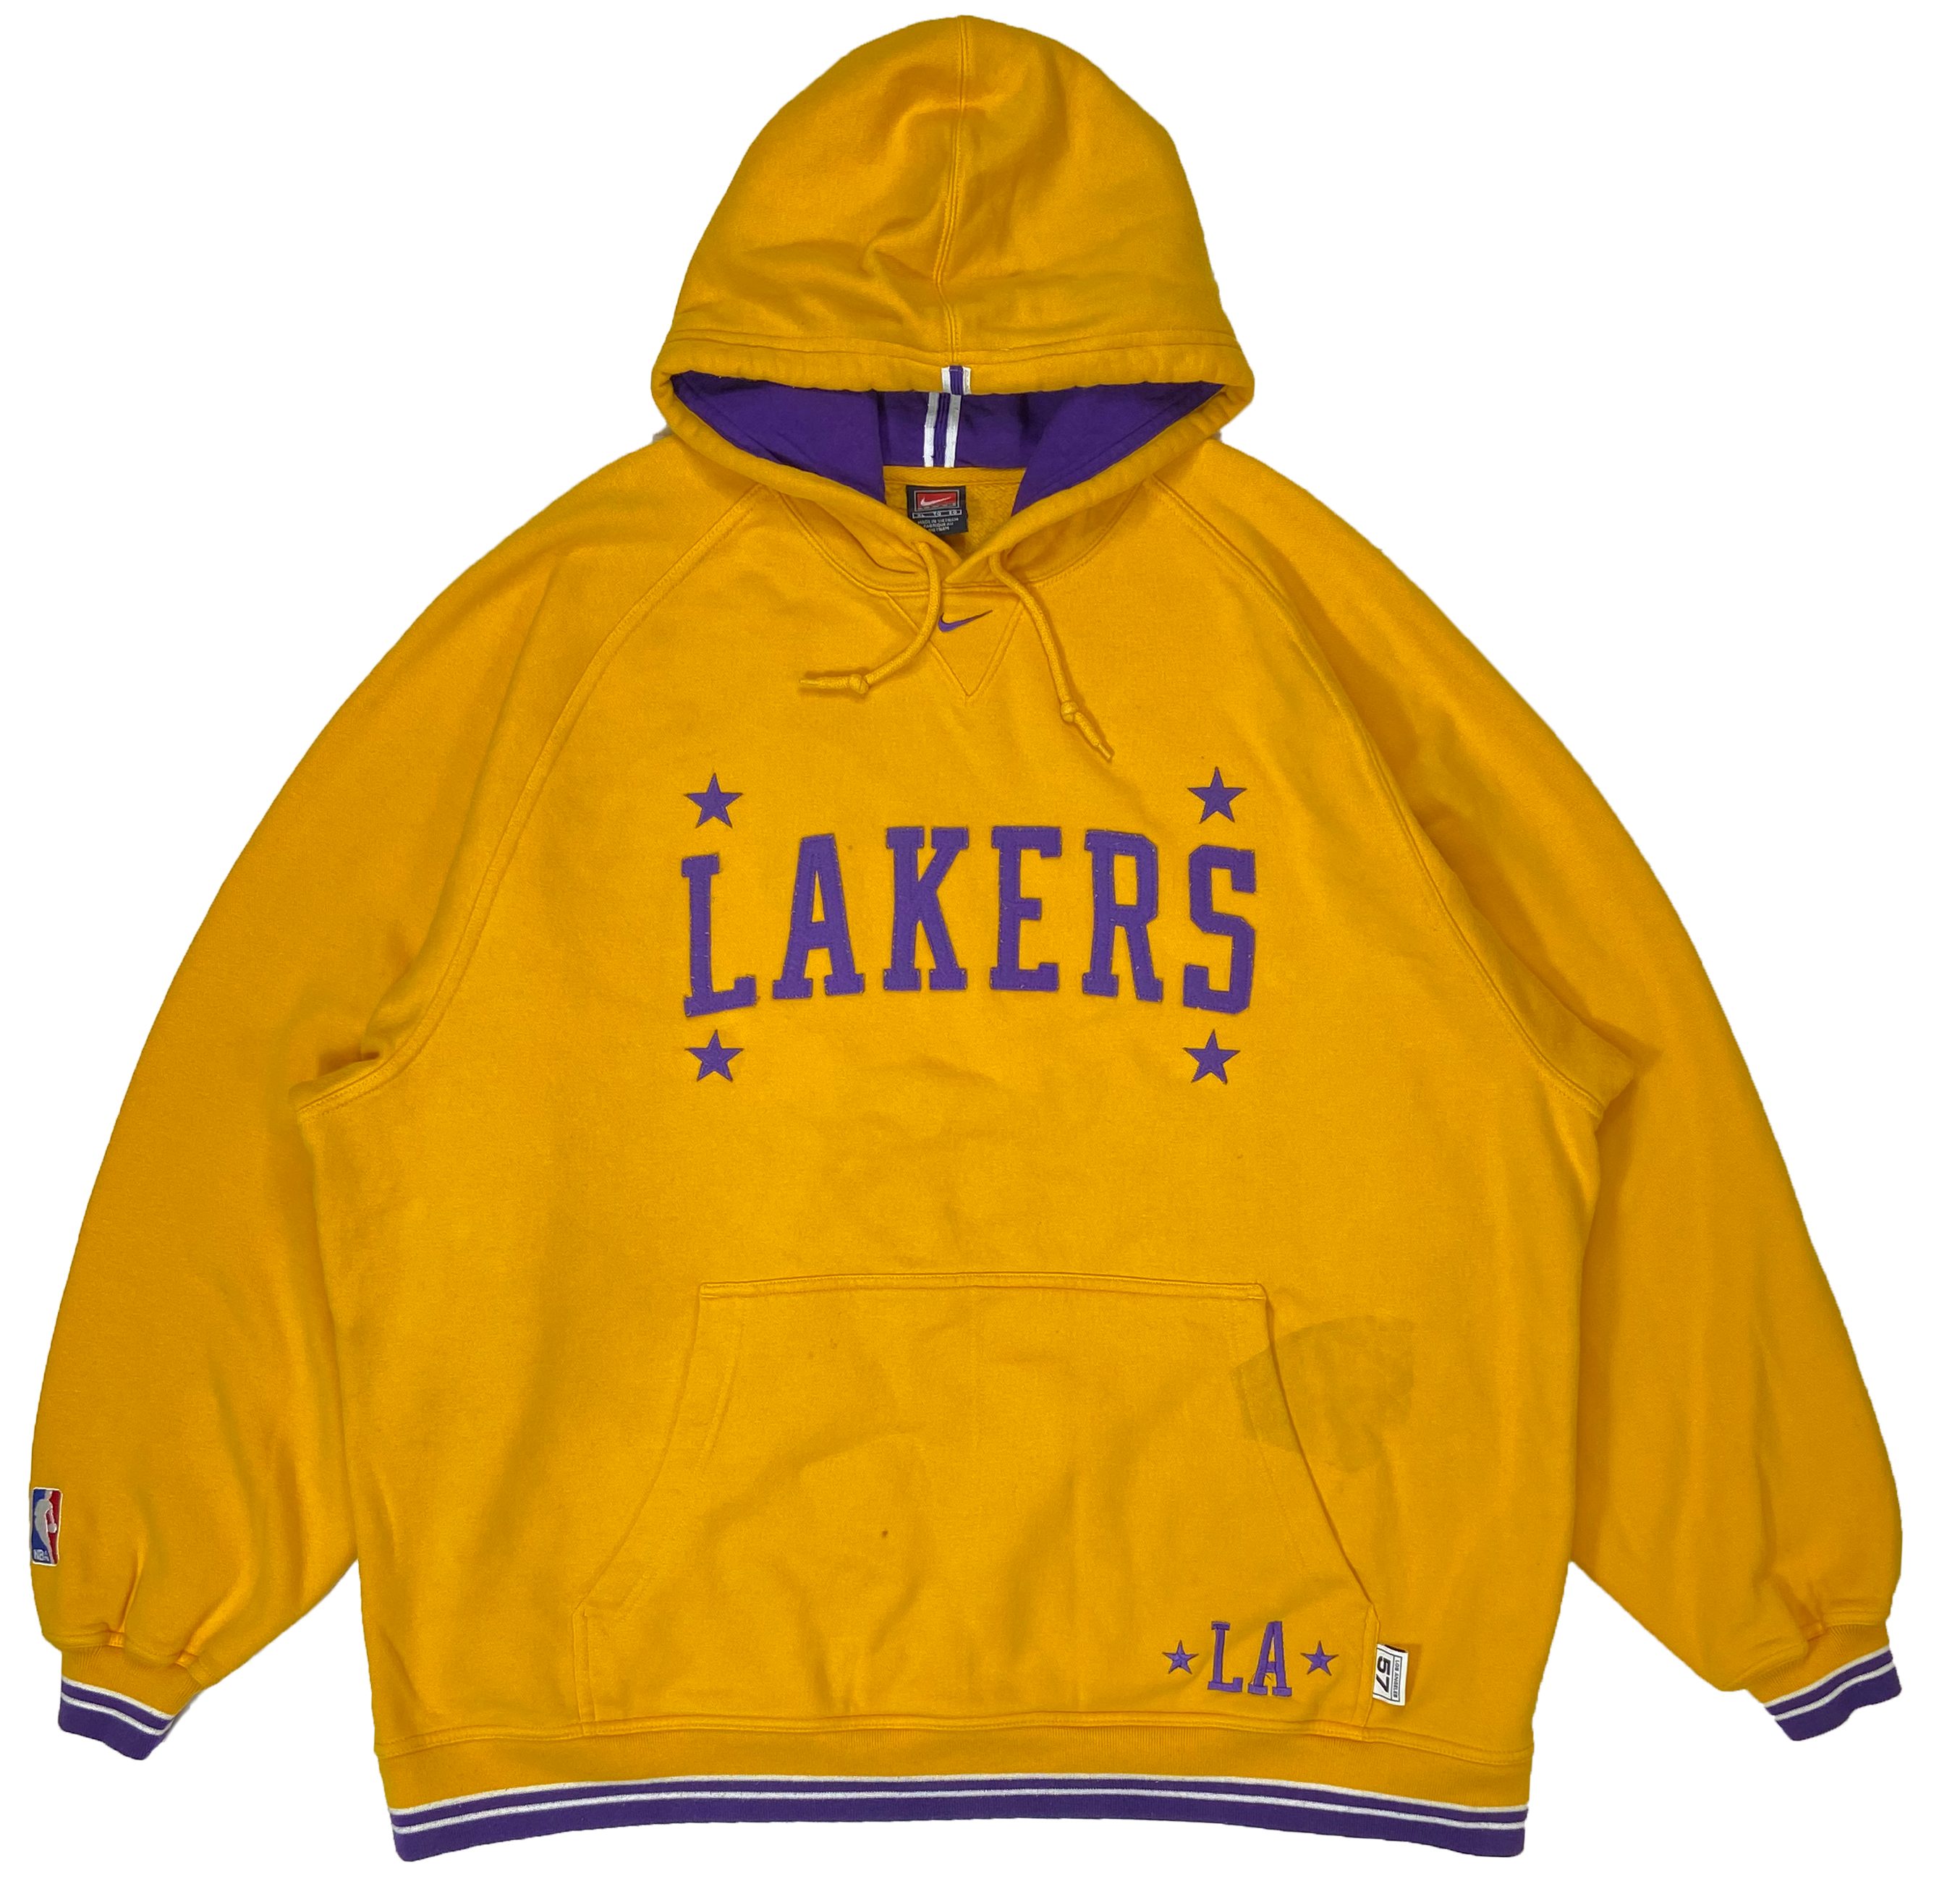 Vintage NBA Los Angeles Lakers Sweatshirt Size Large Made in USA 1990s